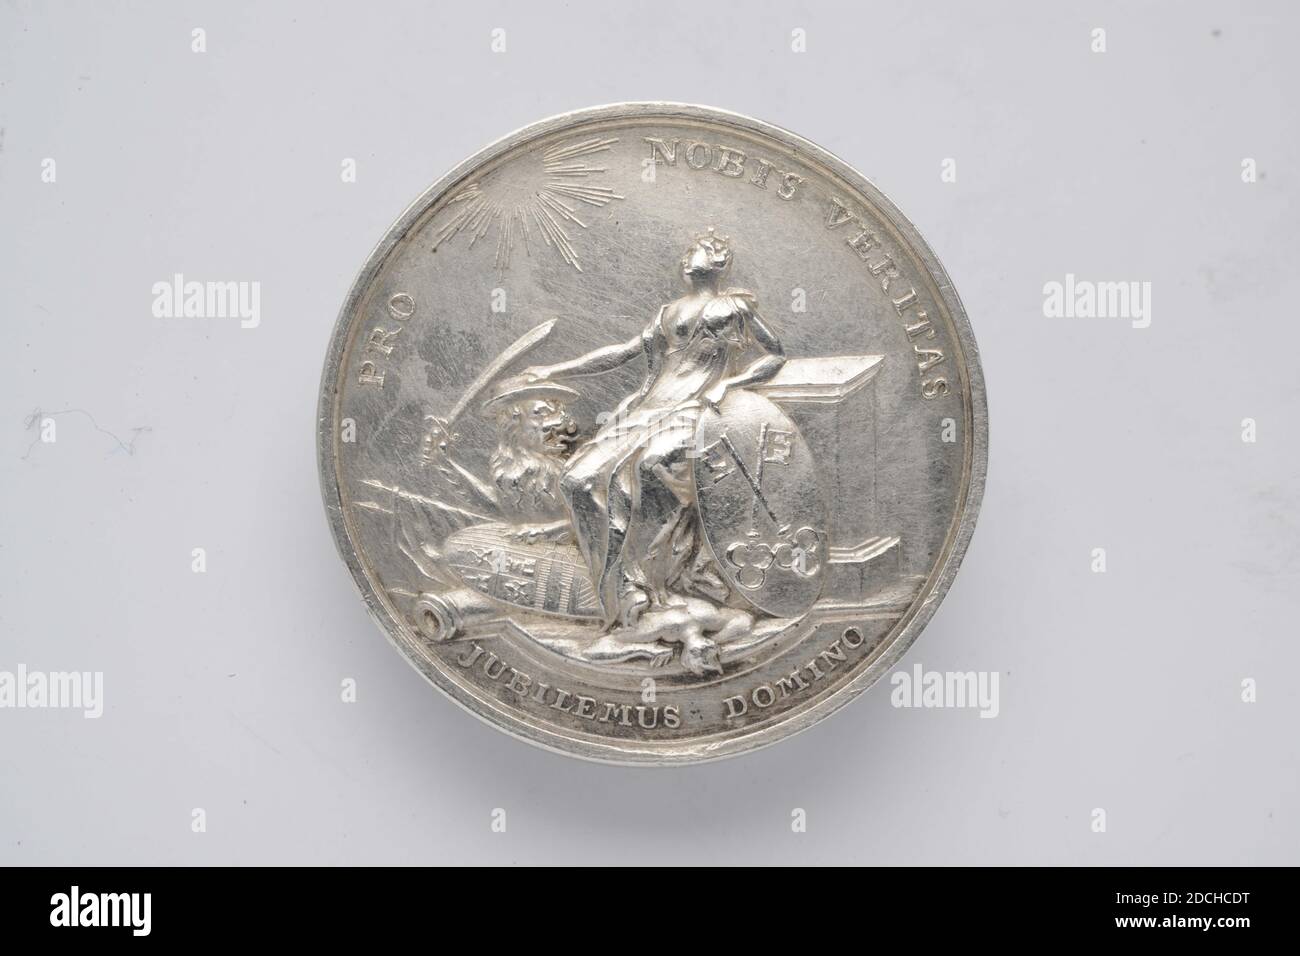 commemorative medal, Carel Frederik Konsé, 1774, minted, General: 3.9 x 0.2cm (39 x 2mm), Weight: 16g, Silver commemorative medal at the second centenary of Leiden's relief in 1774. On the front is a column depicting at the top a coat of arms with the city coat of arms of Leiden. Underneath three oval shields with busts of Van der Werf, Dousa and Van Hout. Below that are hanging garlands and a flowing ribbon with inscription: VIRTVTE and FORTITVDINE. Under the column the inscription: CELEBR: 3 OCTOB: 1774, and around the inscription: IL JVBILAEO LIBERATIONIS LEIDENSIS. On the reverse a view of Stock Photo